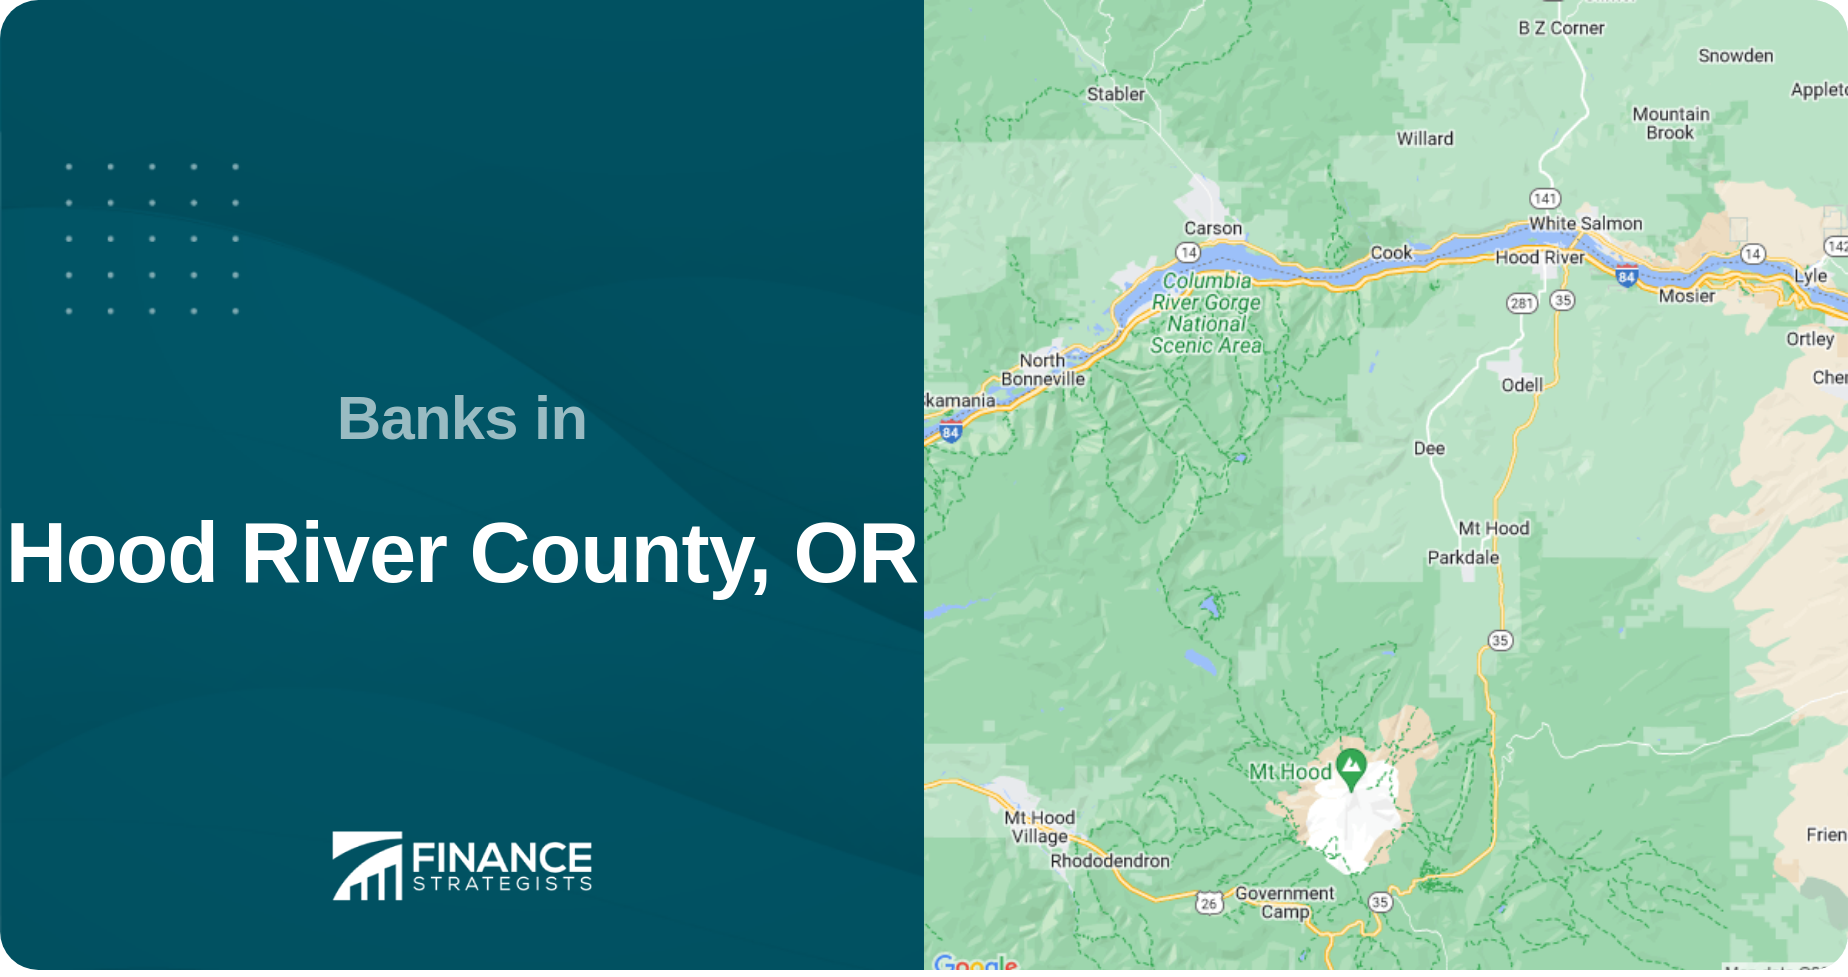 Banks in Hood River County, OR